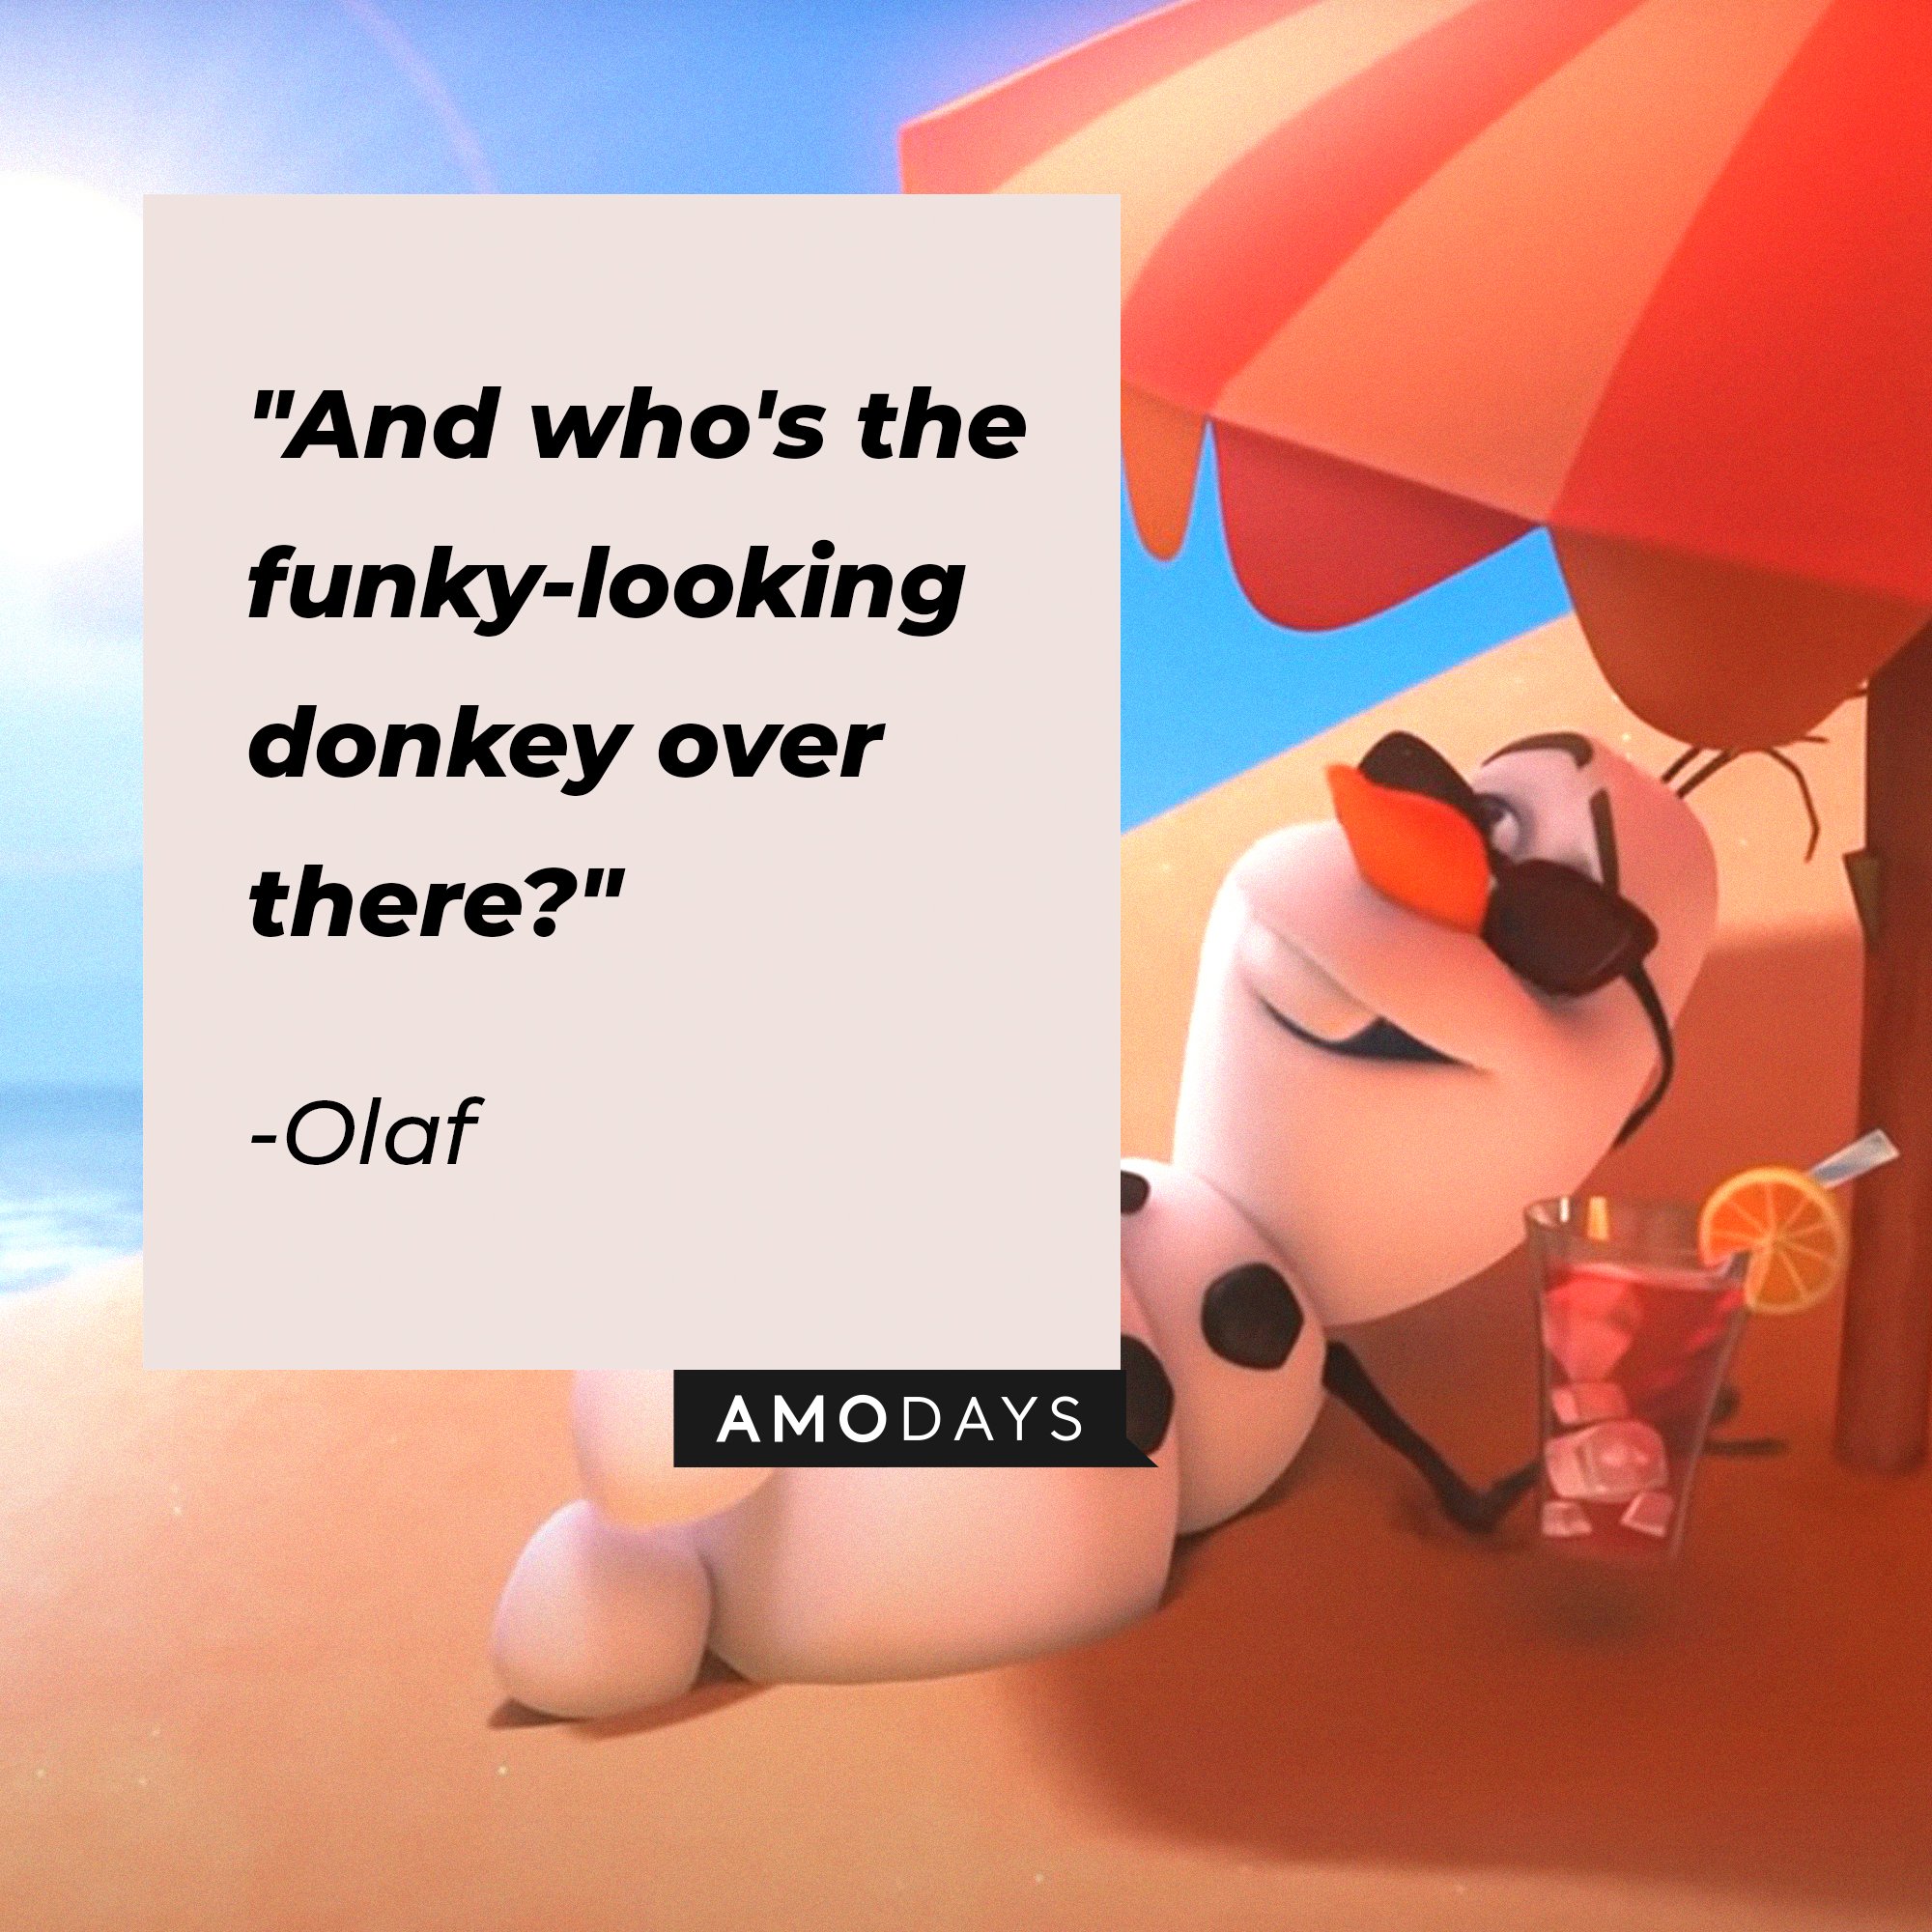 Olaf’s quote: "And who's the funky-looking donkey over there?" | Image: AmoDays